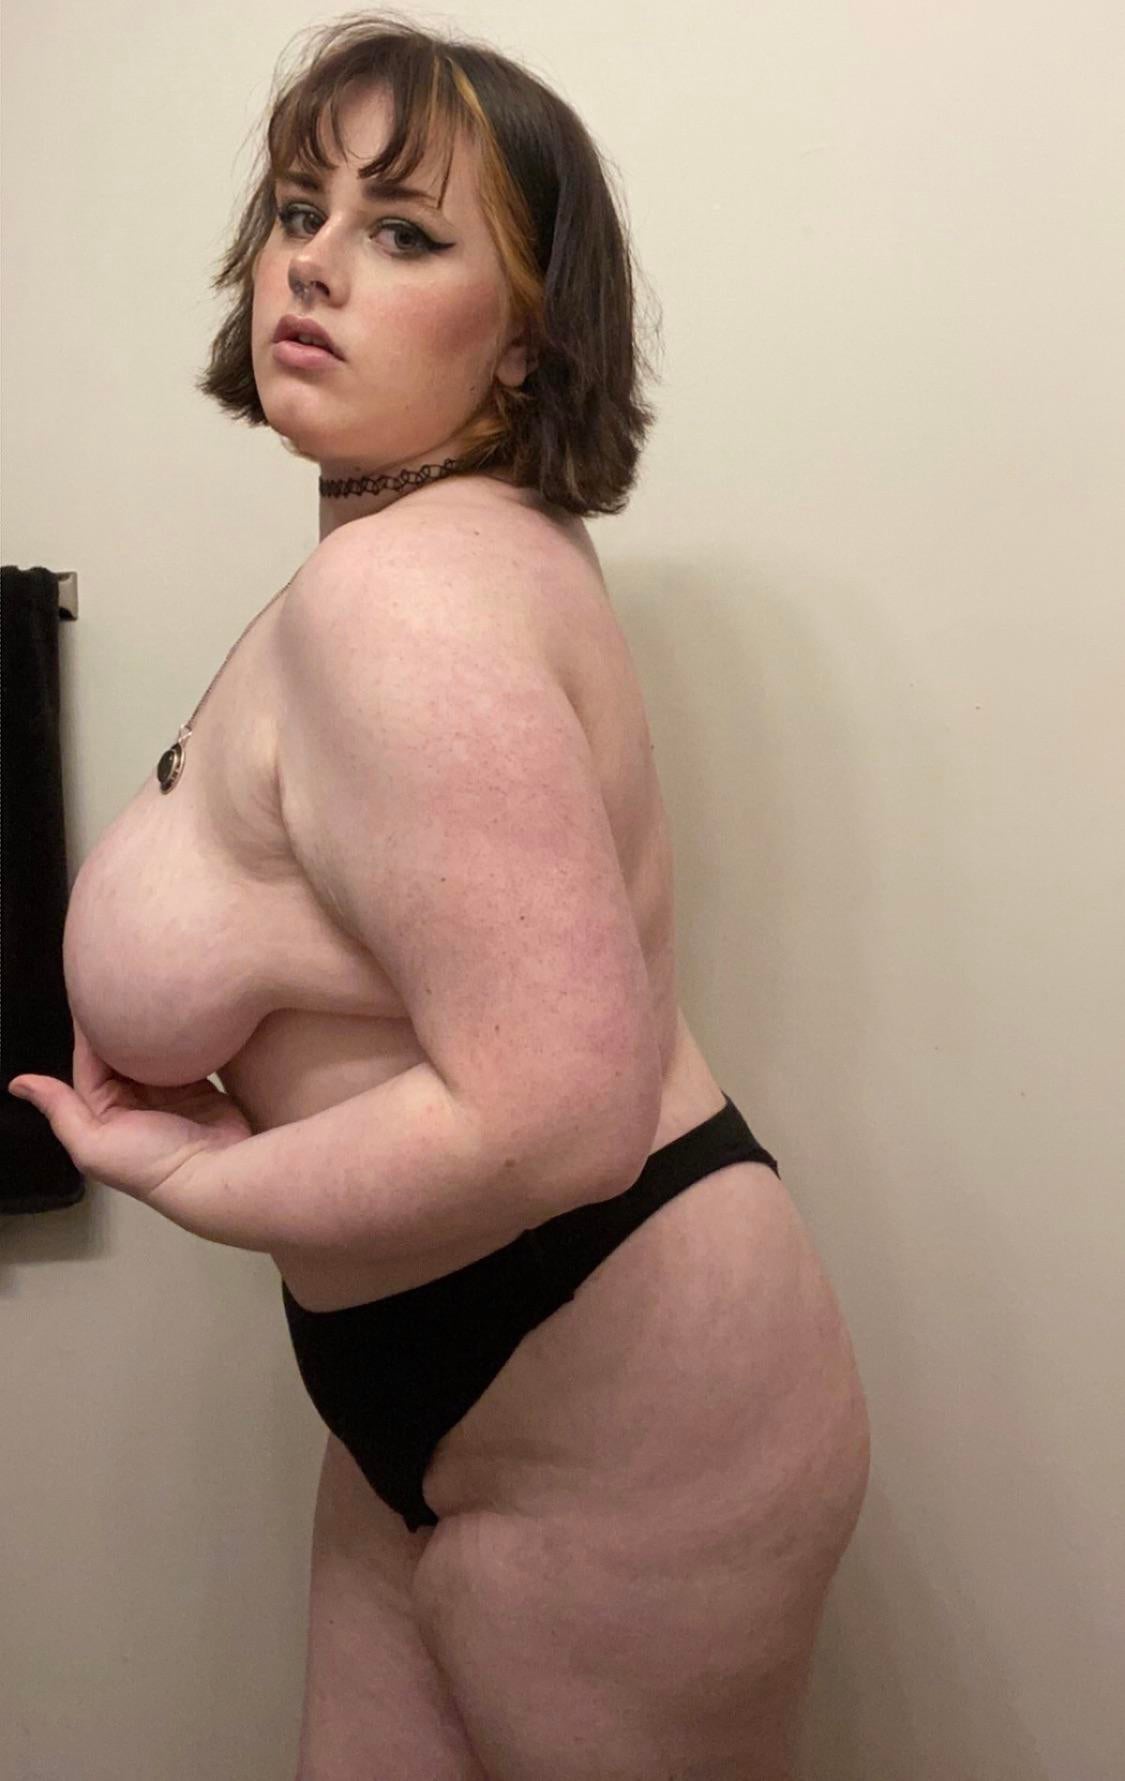 Chubby girls are hot Proof right here Thick White